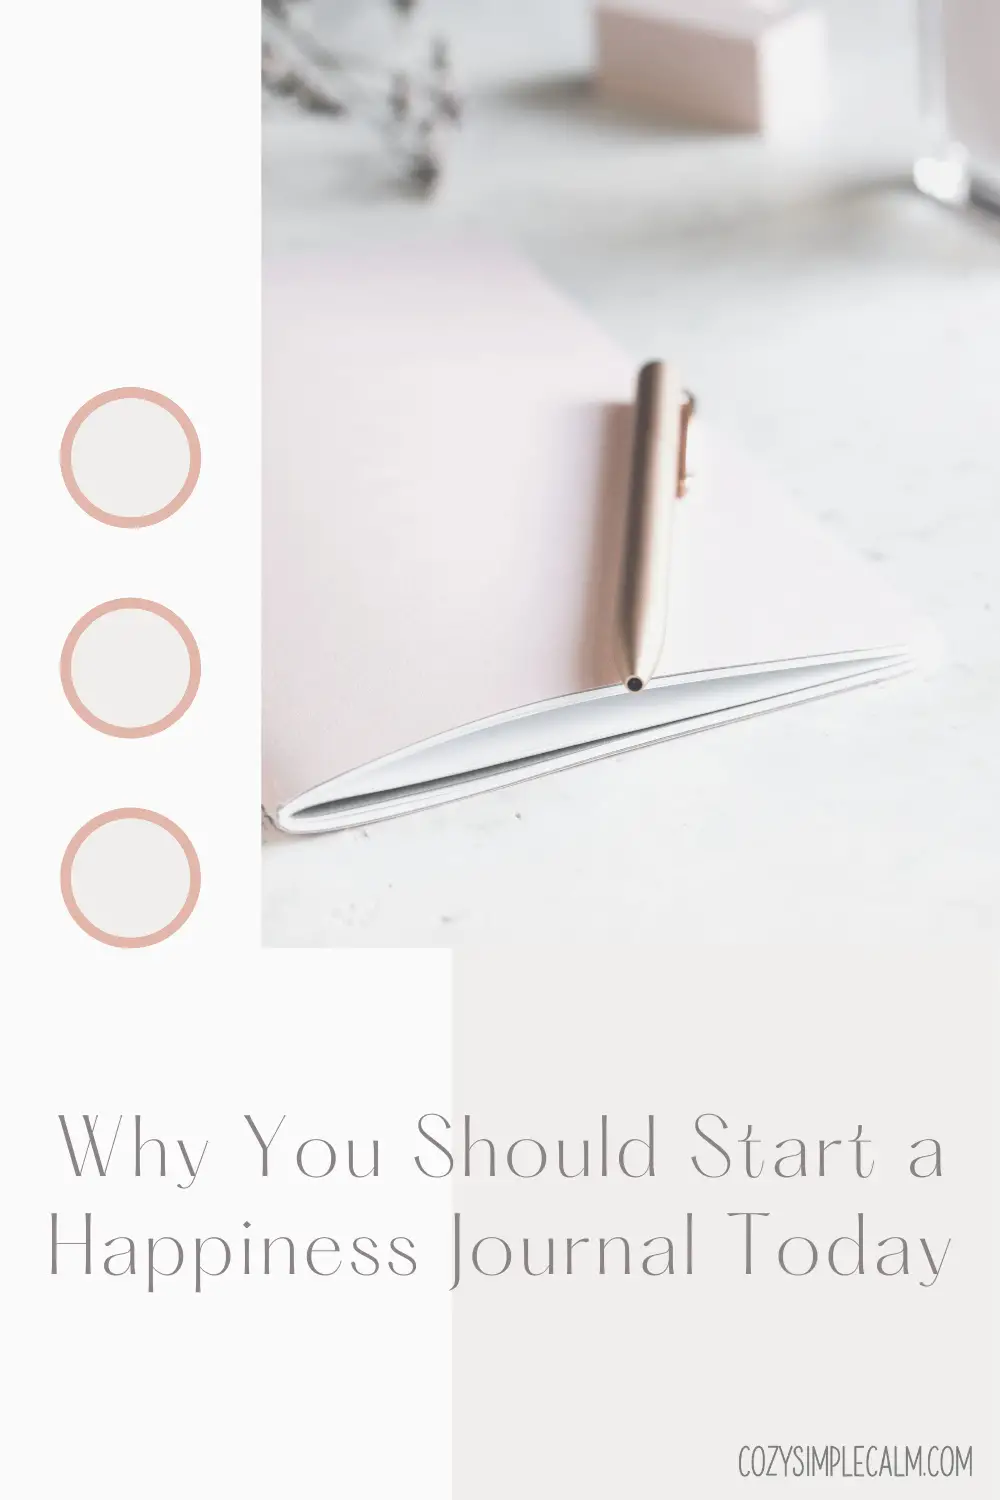 Image of gold pen sitting on top of pink notebook - Text overlay: Why you should start a happiness journal today